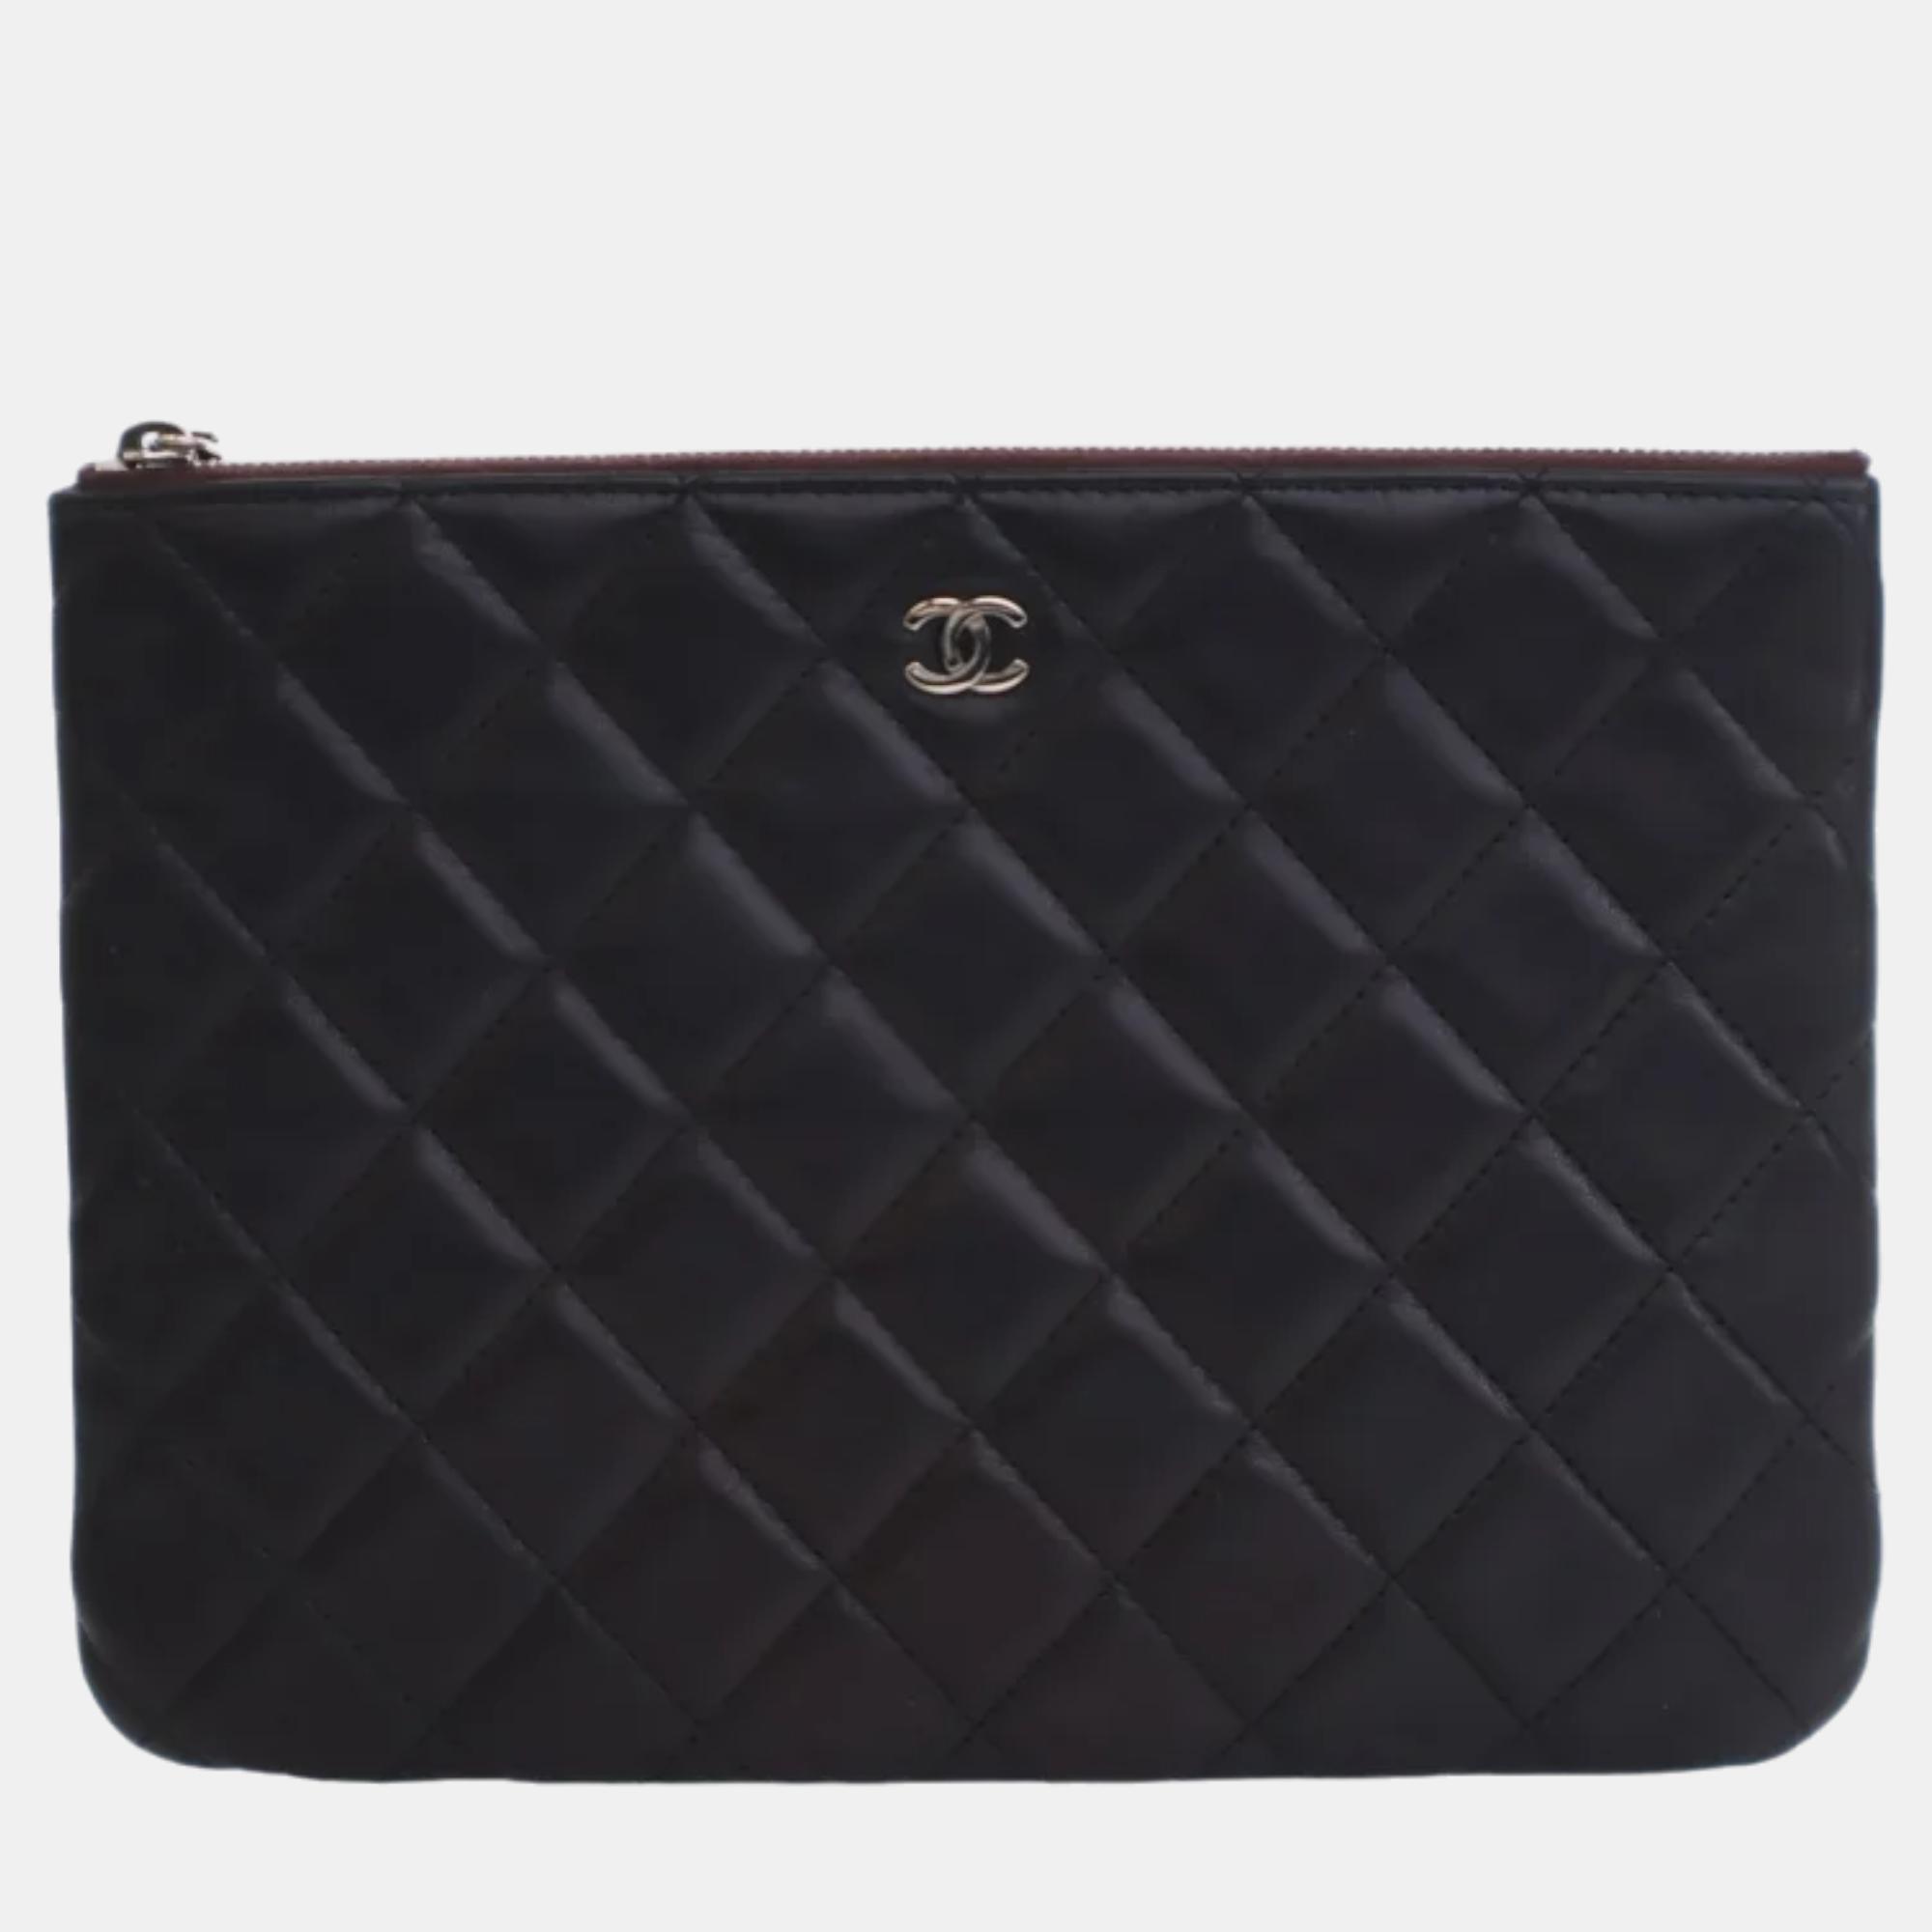 Chanel black lambskin quilted medium cosmetic case